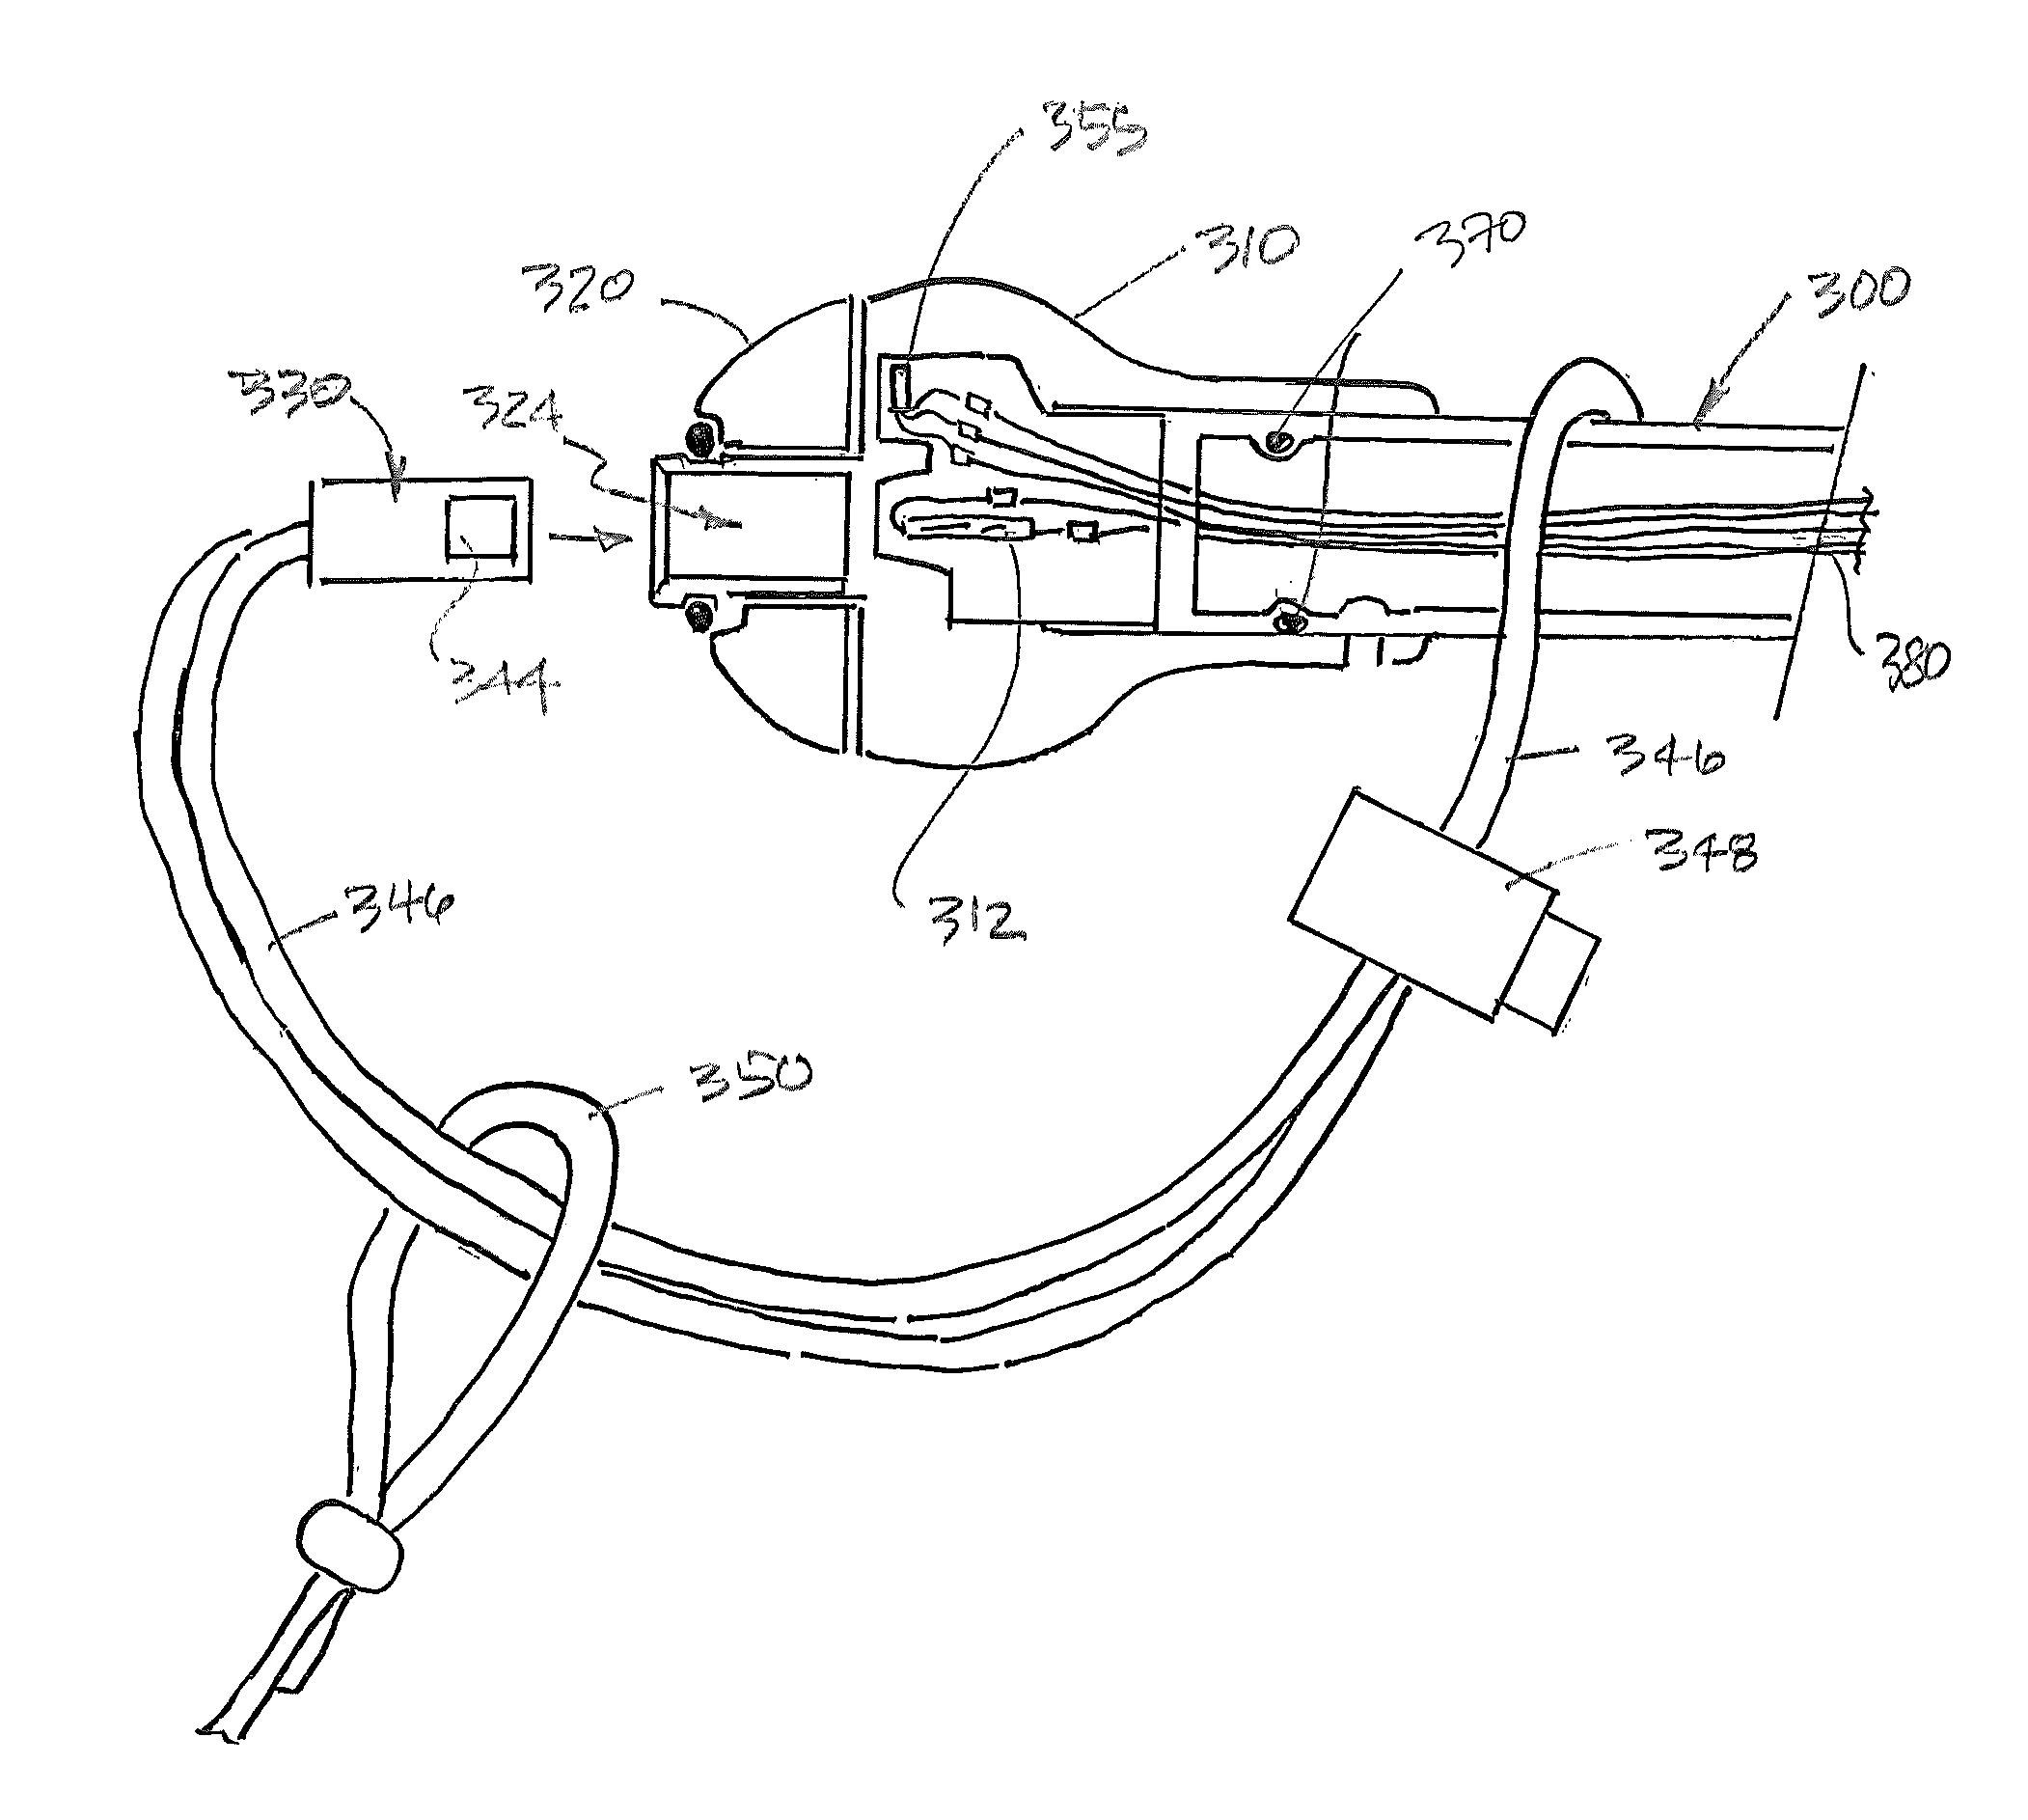 Activation and deactivation assembly for an electric outboard motor